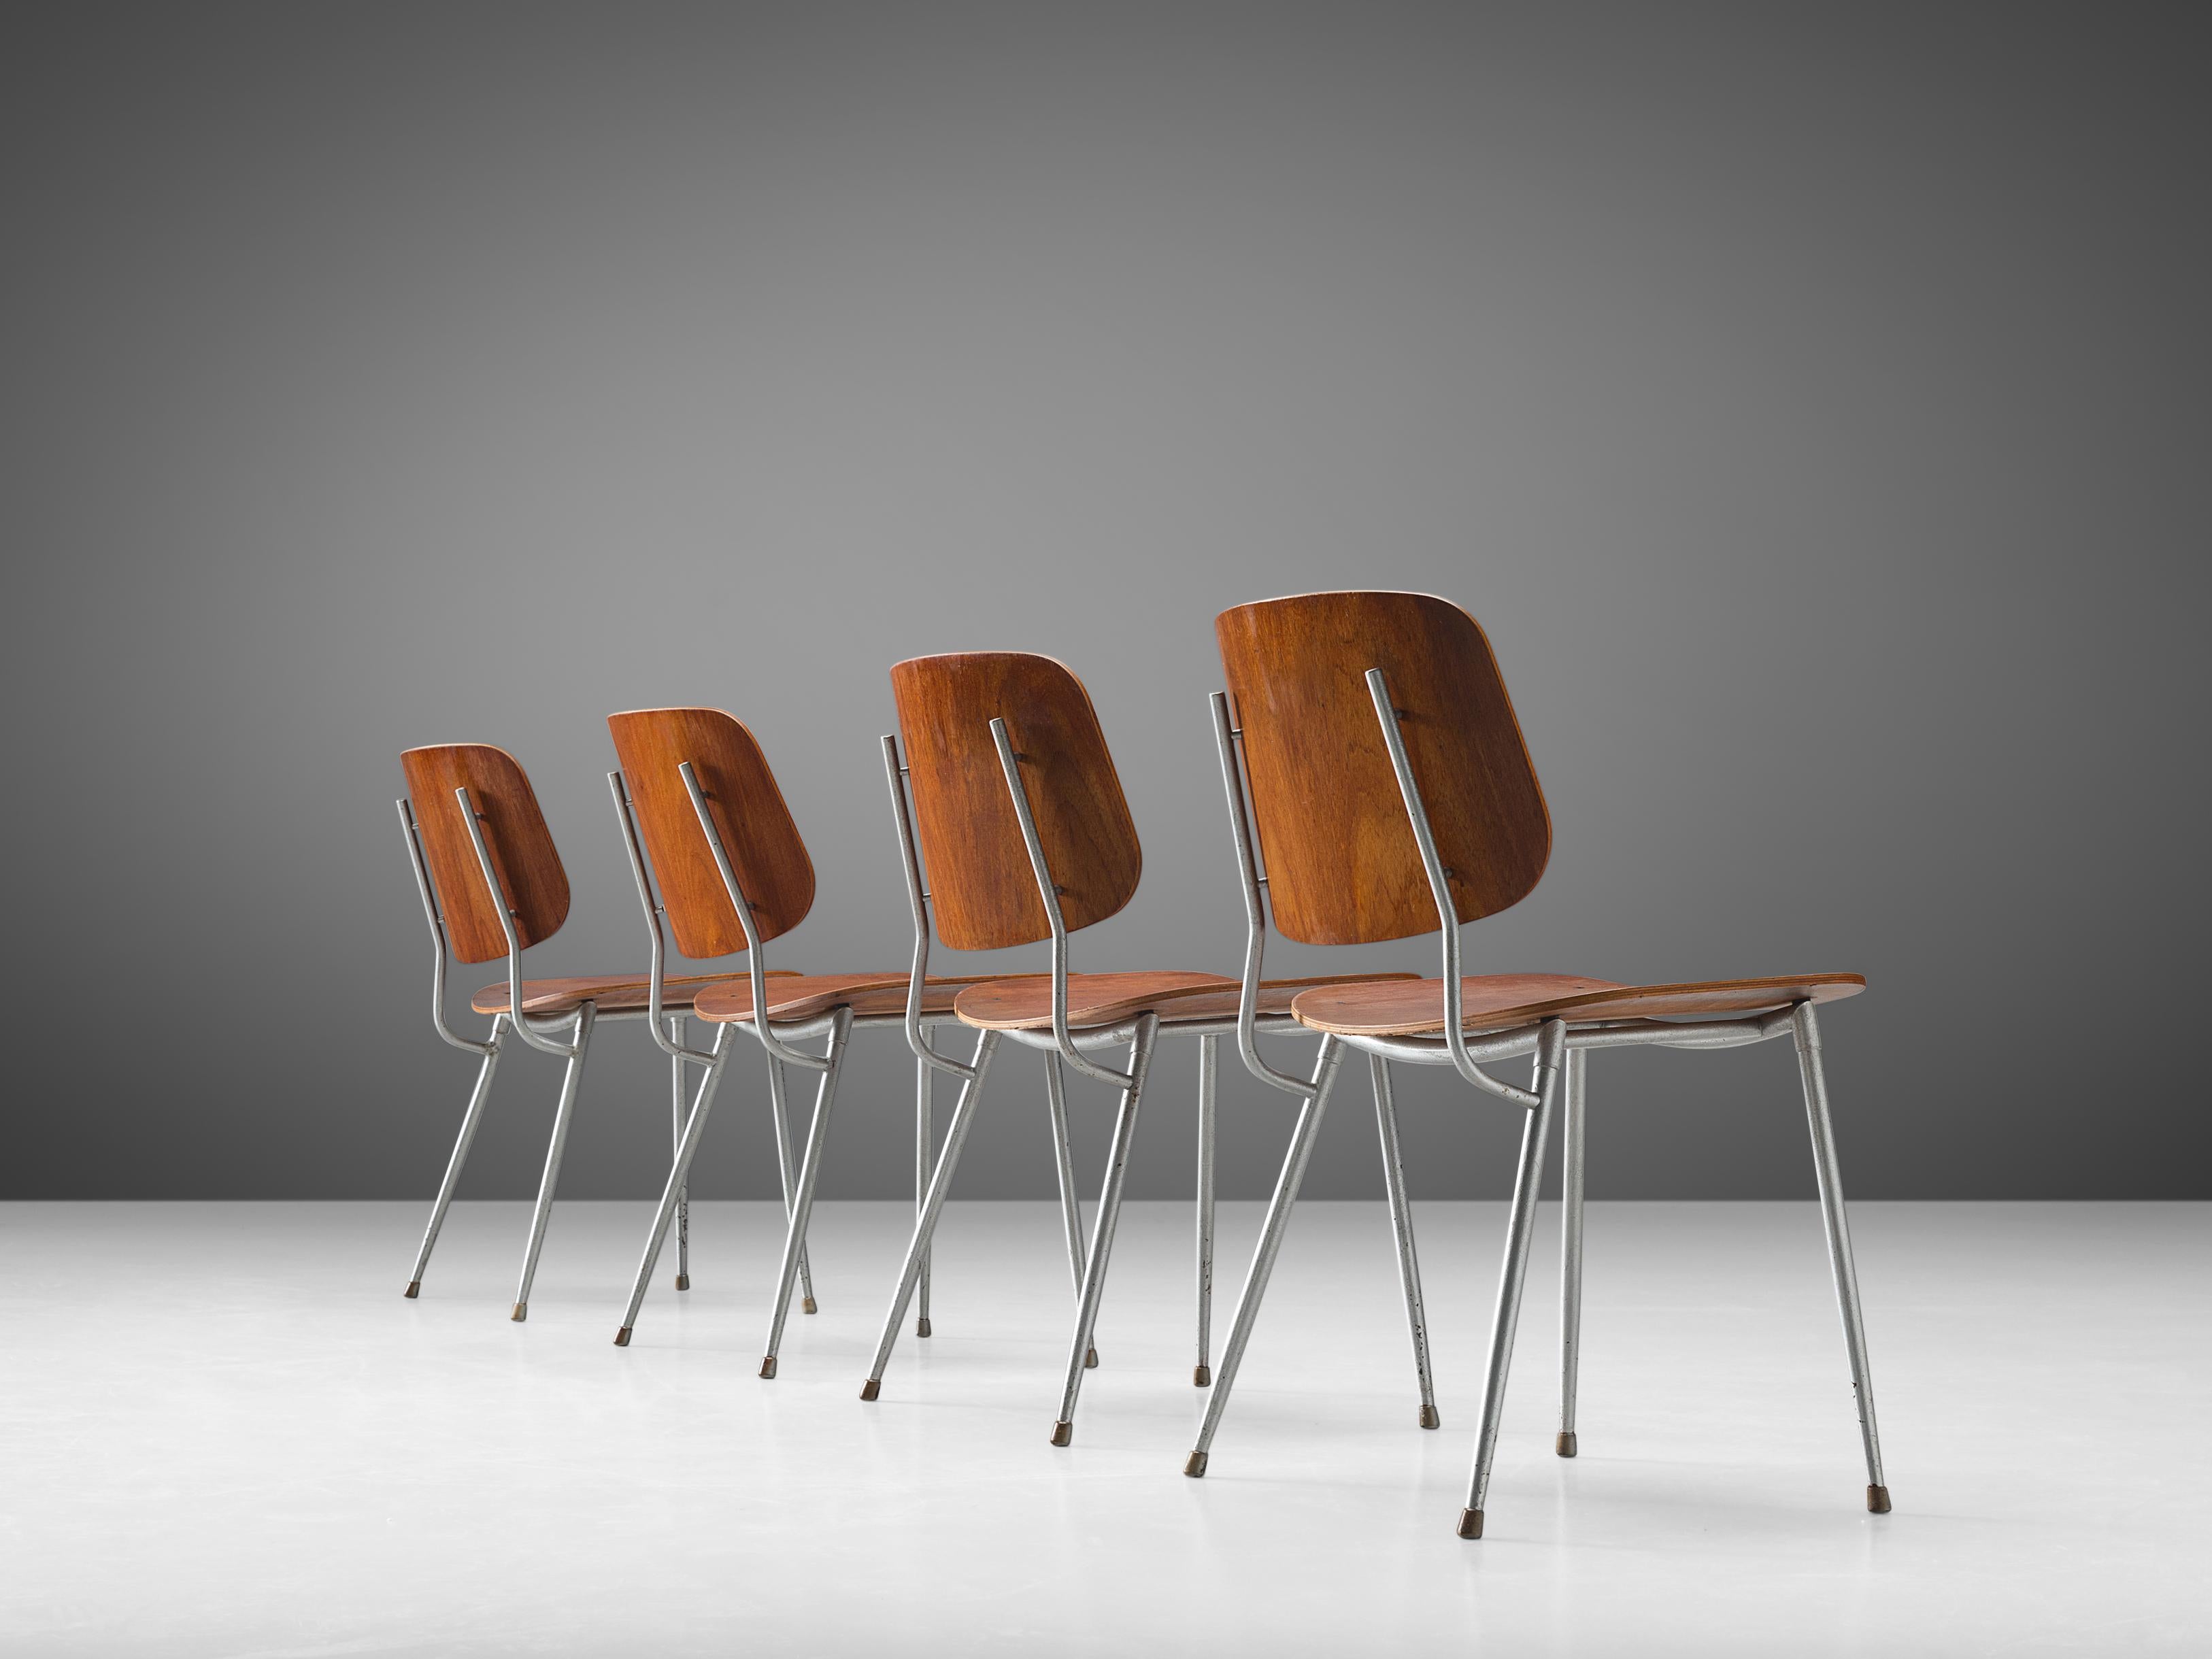 Børge Mogensen for Søborg Møbelfabrik, set of four dining chairs model 201, teak, steel, Denmark, 1953 

This set of four dining chairs features a slender steel frame with molded teak seat and back. The chair consists of two wide and slightly curved